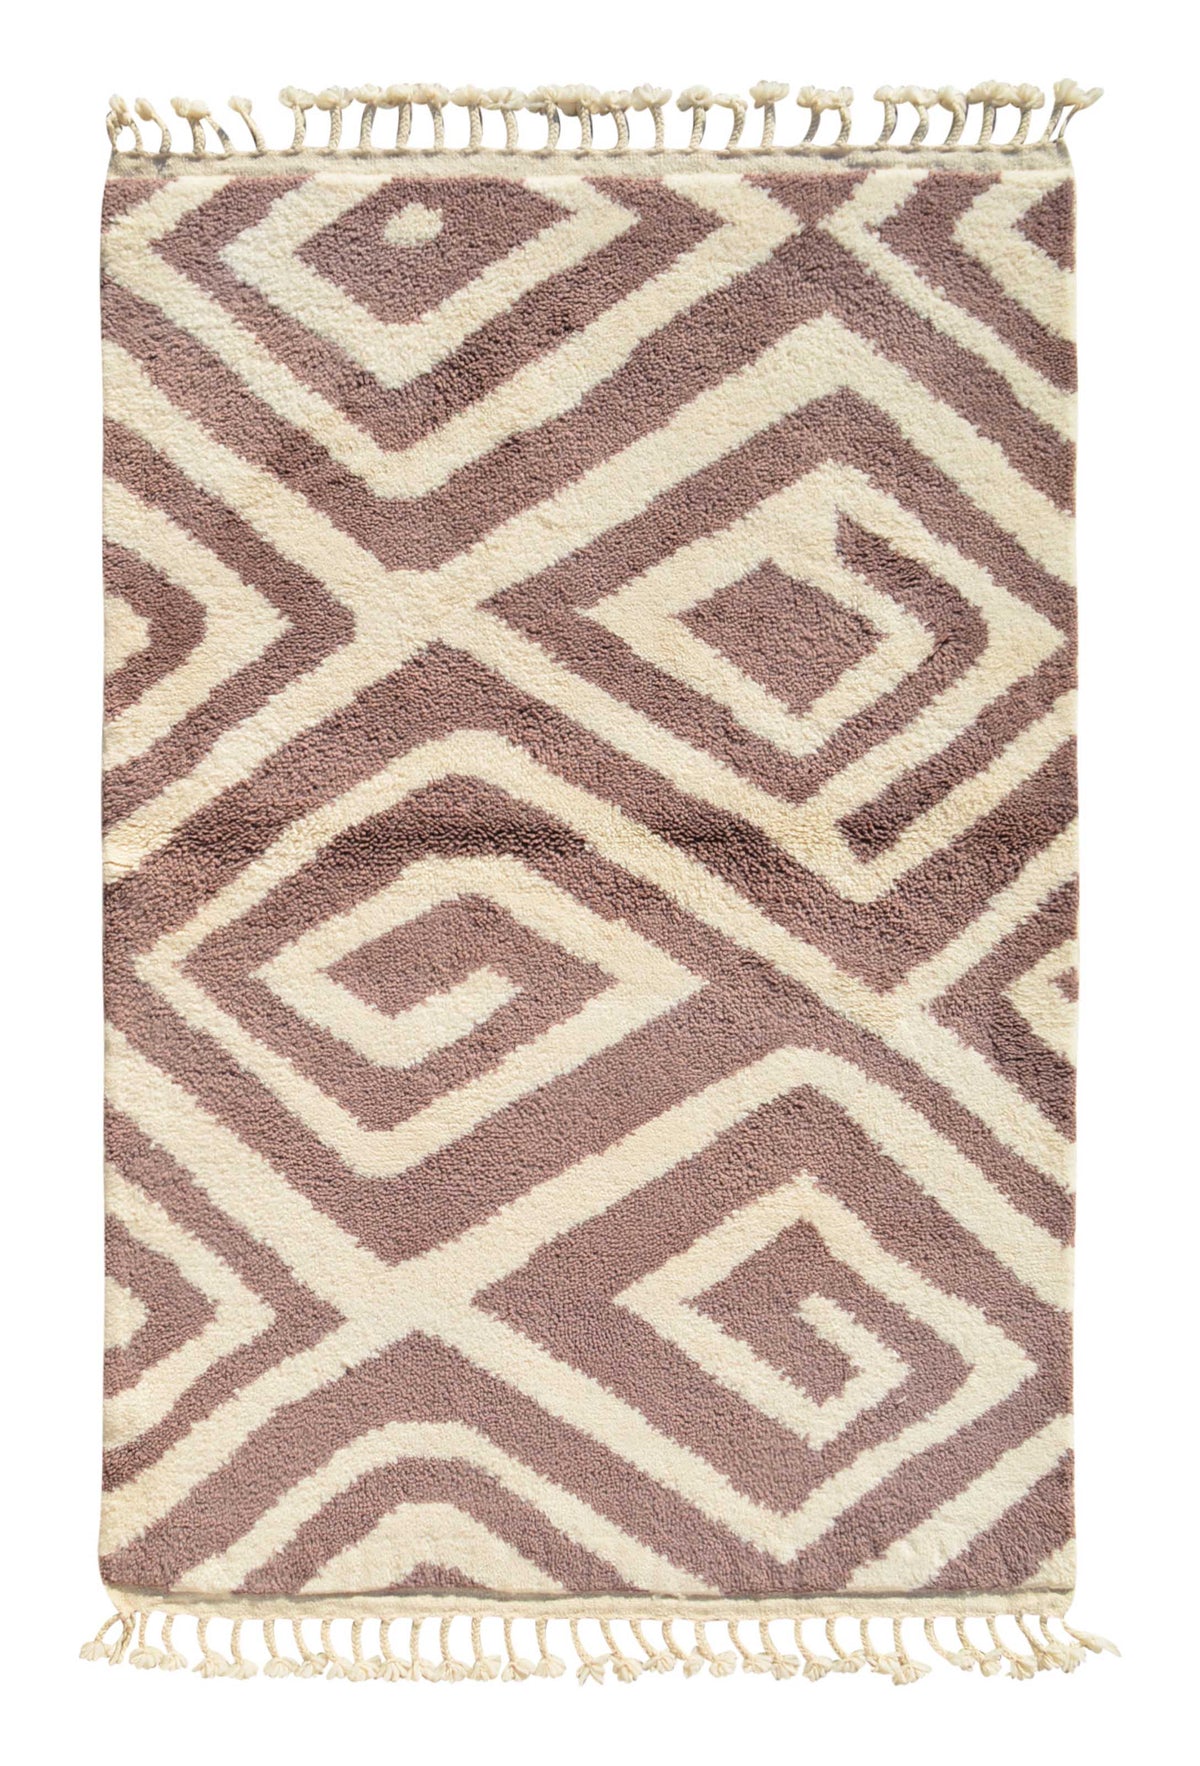 Moroccan Rug Peachy Diamonds - Pink Orange Diamond Handmade Rug - Add a touch of elegance to your home Illuminate Collective